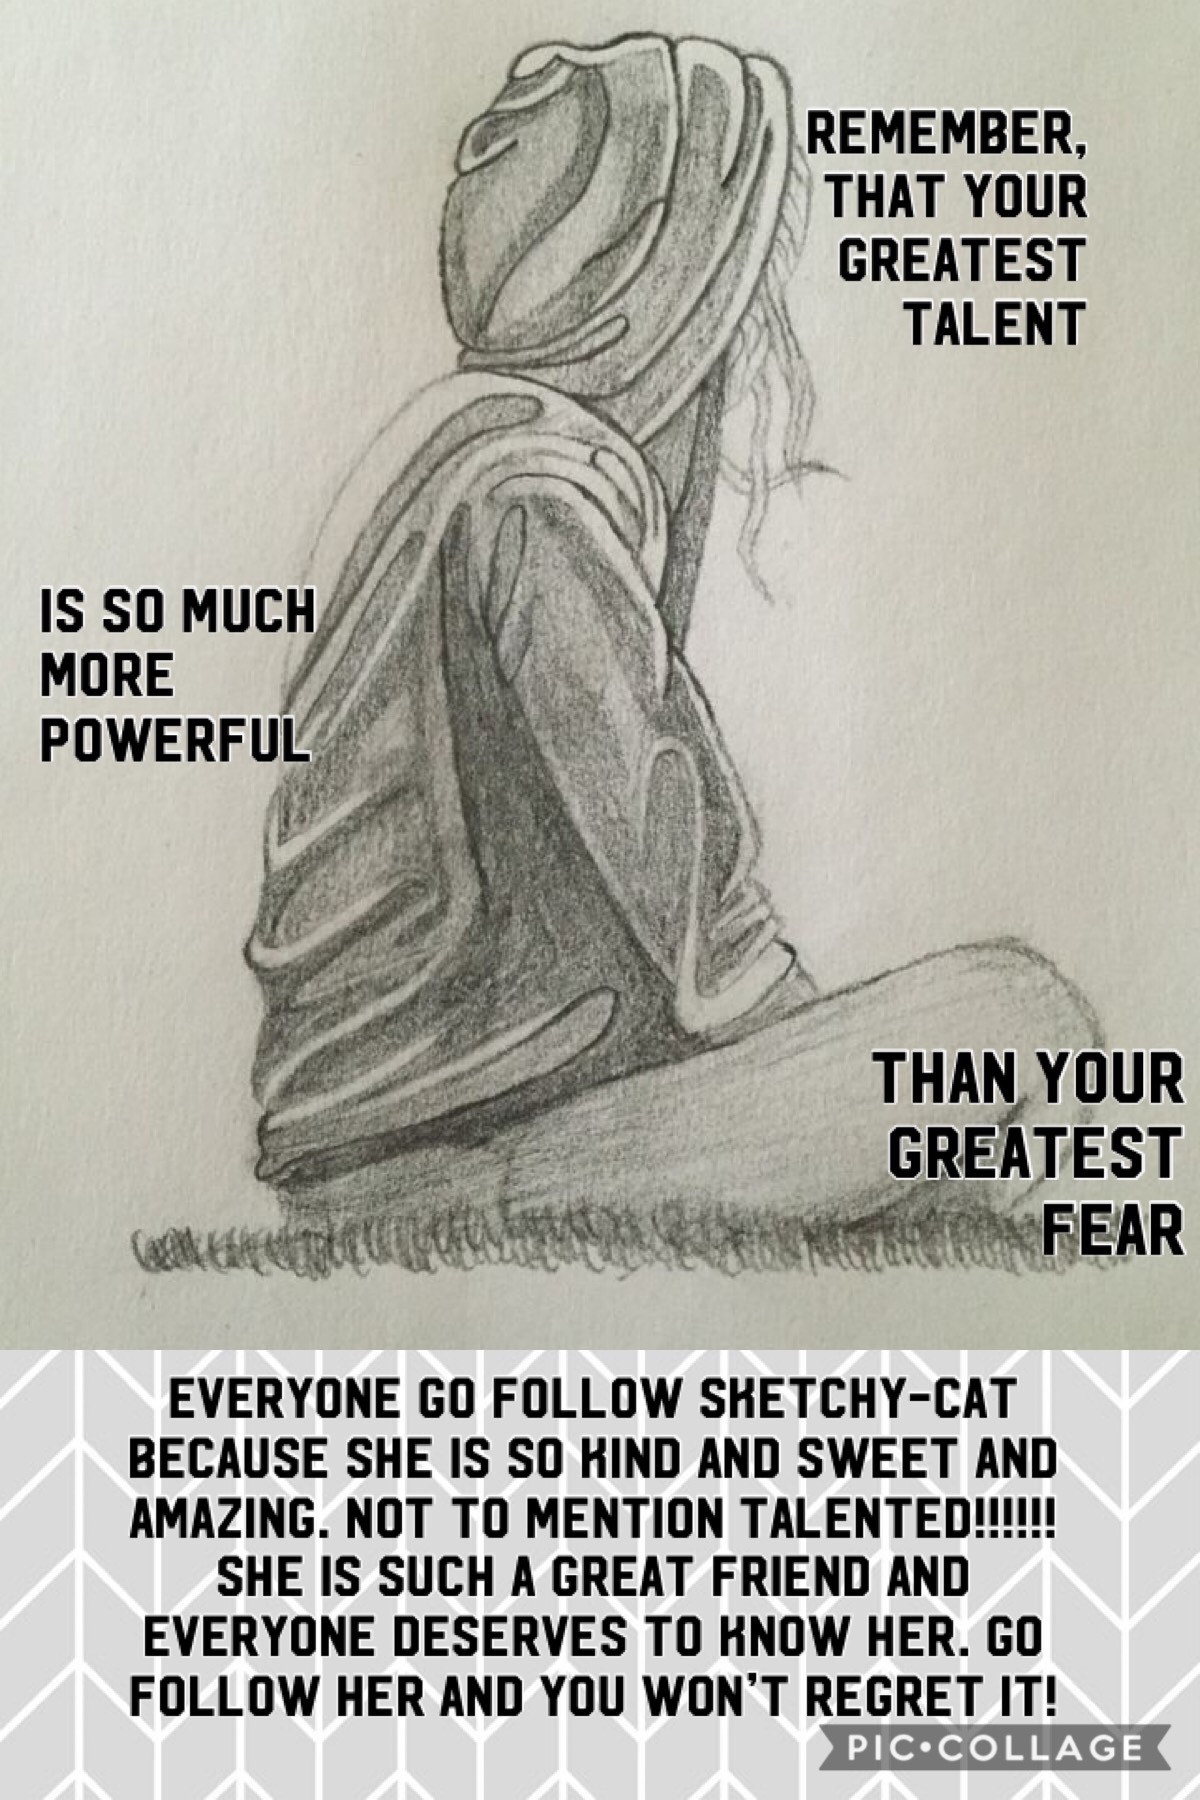 Sketchy-Cat is so freaking talented. I don’t get how she does it. Here I will be promoting her and stuff like that. She is AMAZING AND GO FOLLOW HER!!!